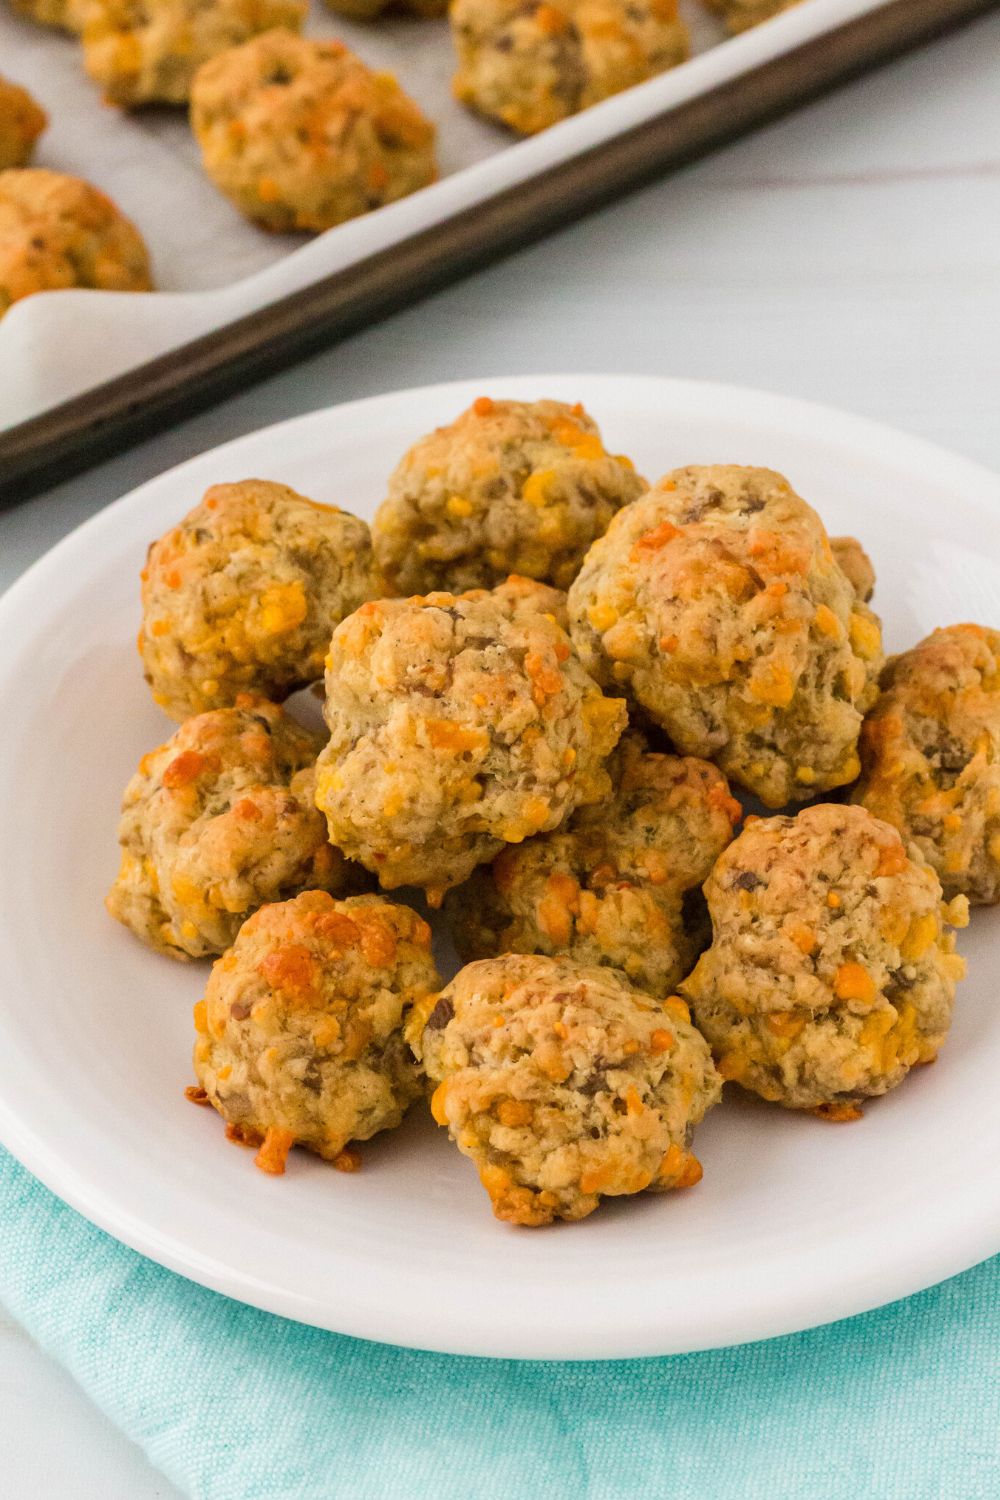 sausage balls served on a white plate, with a baking sheet of sausage balls in the background